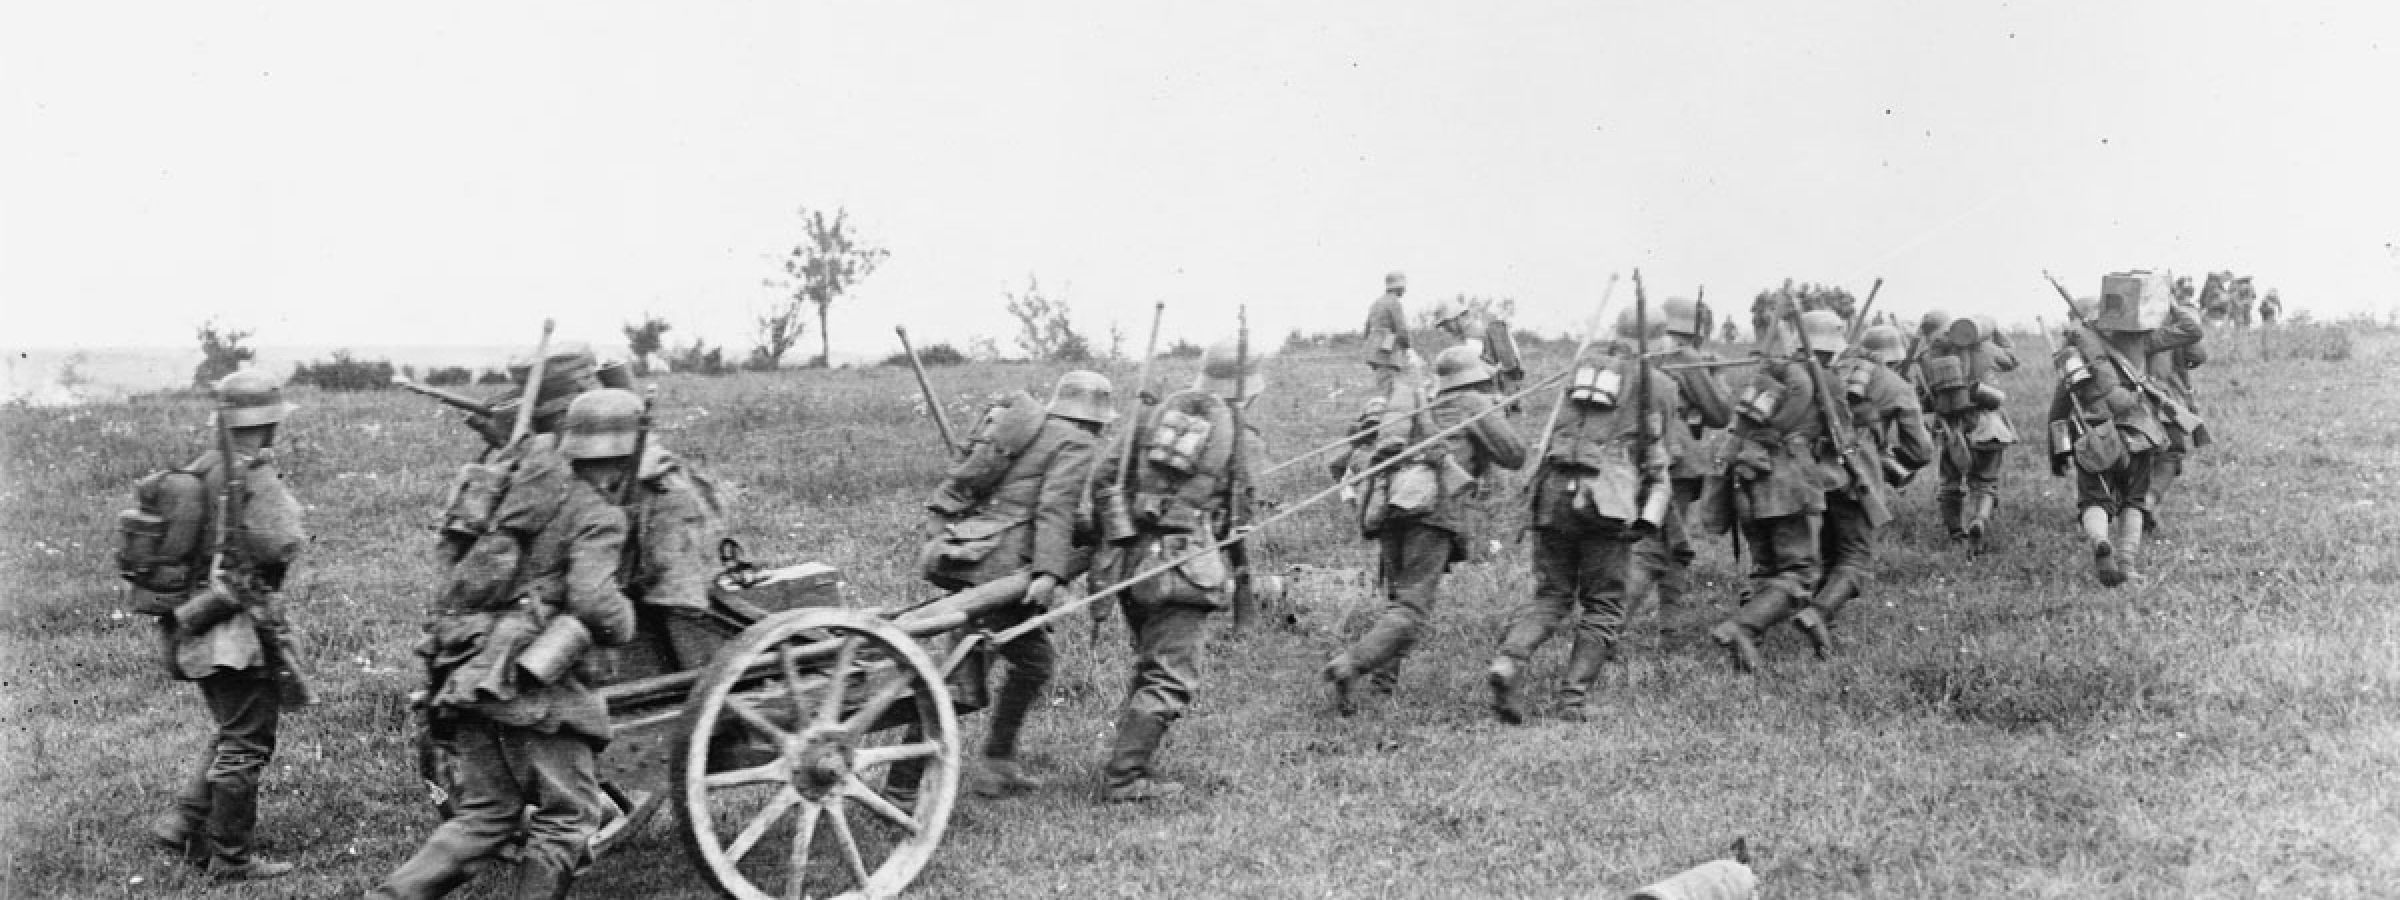 German soldiers haul a granatenwerfer - a type of grenade or mortar thrower - forward in support of advancing stormtroops, 15 July 1918.